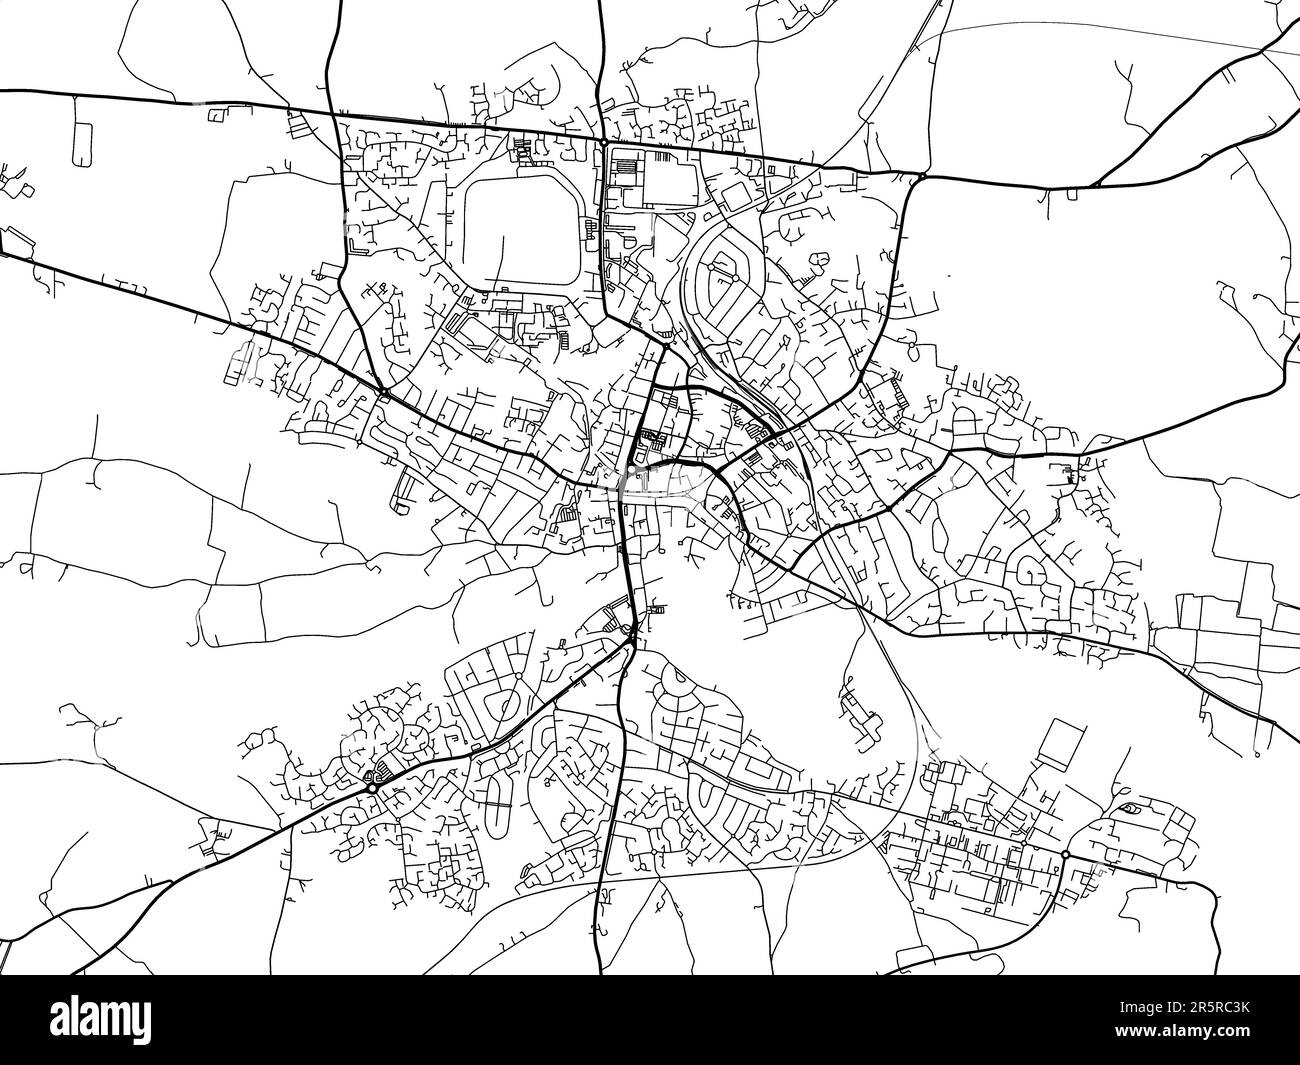 Road map of the city of  Hereford in the United Kingdom on a white background. Stock Photo